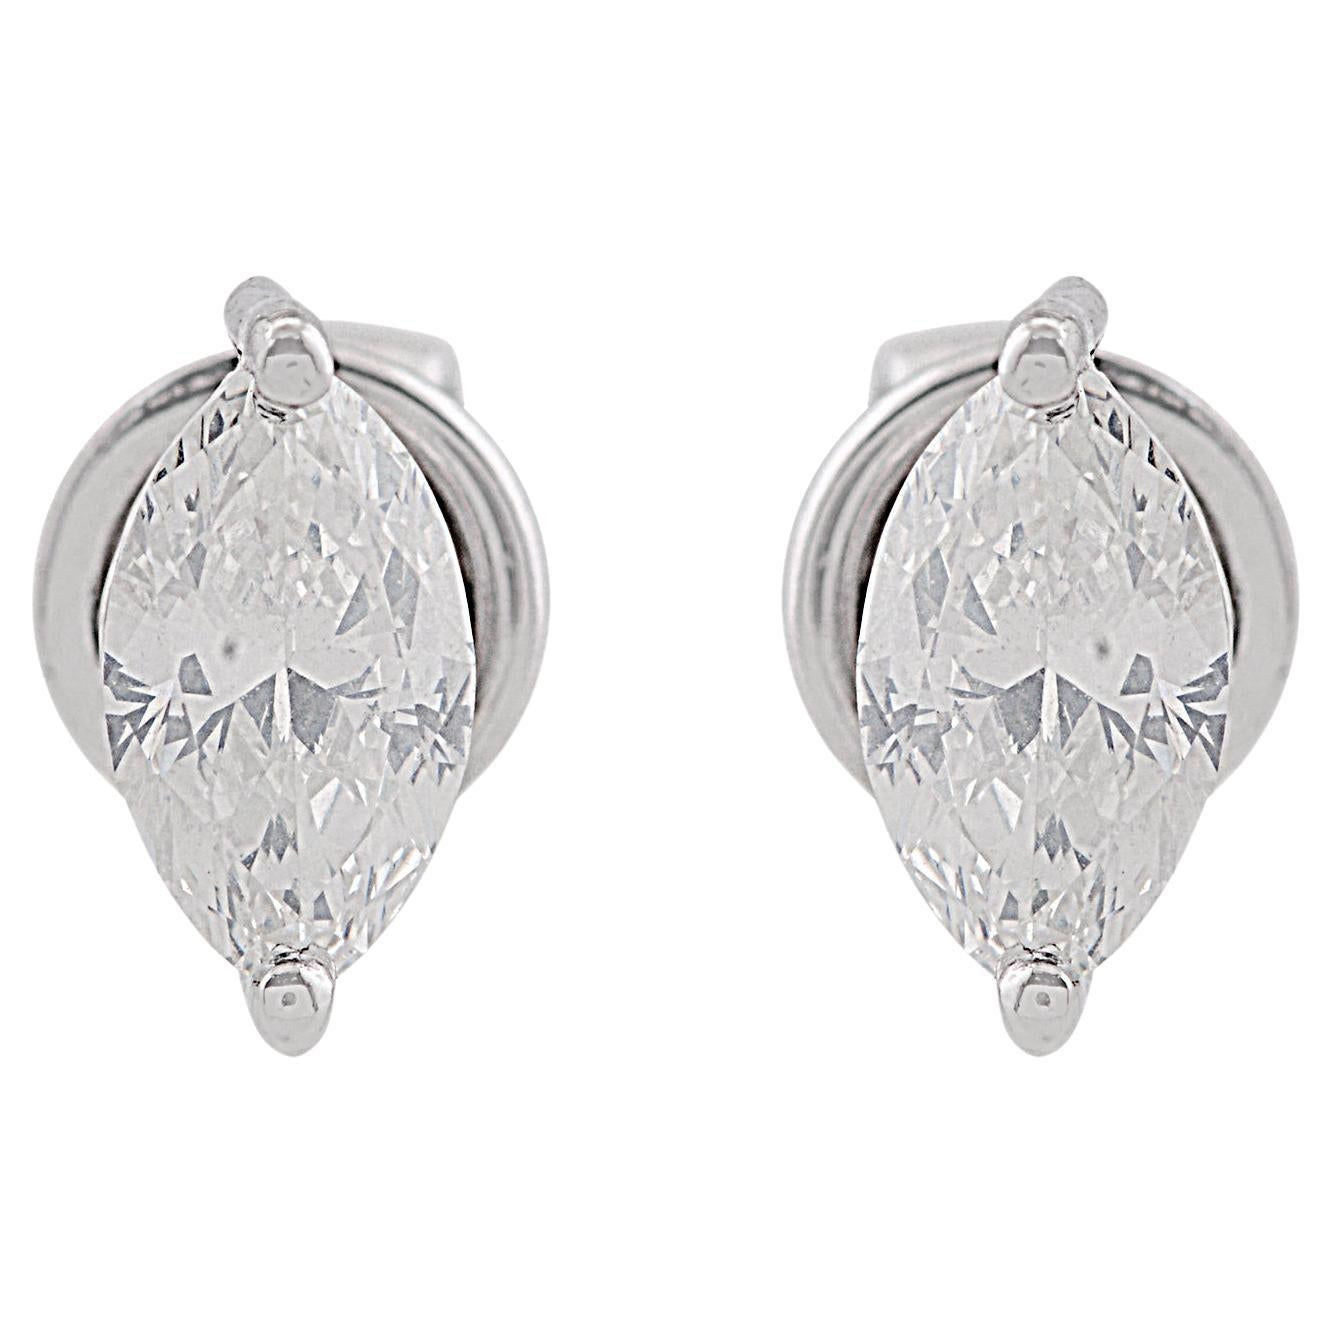 0.78 Carat Solitaire Marquise Diamond Stud Earrings Solid 10k White Gold Jewelry